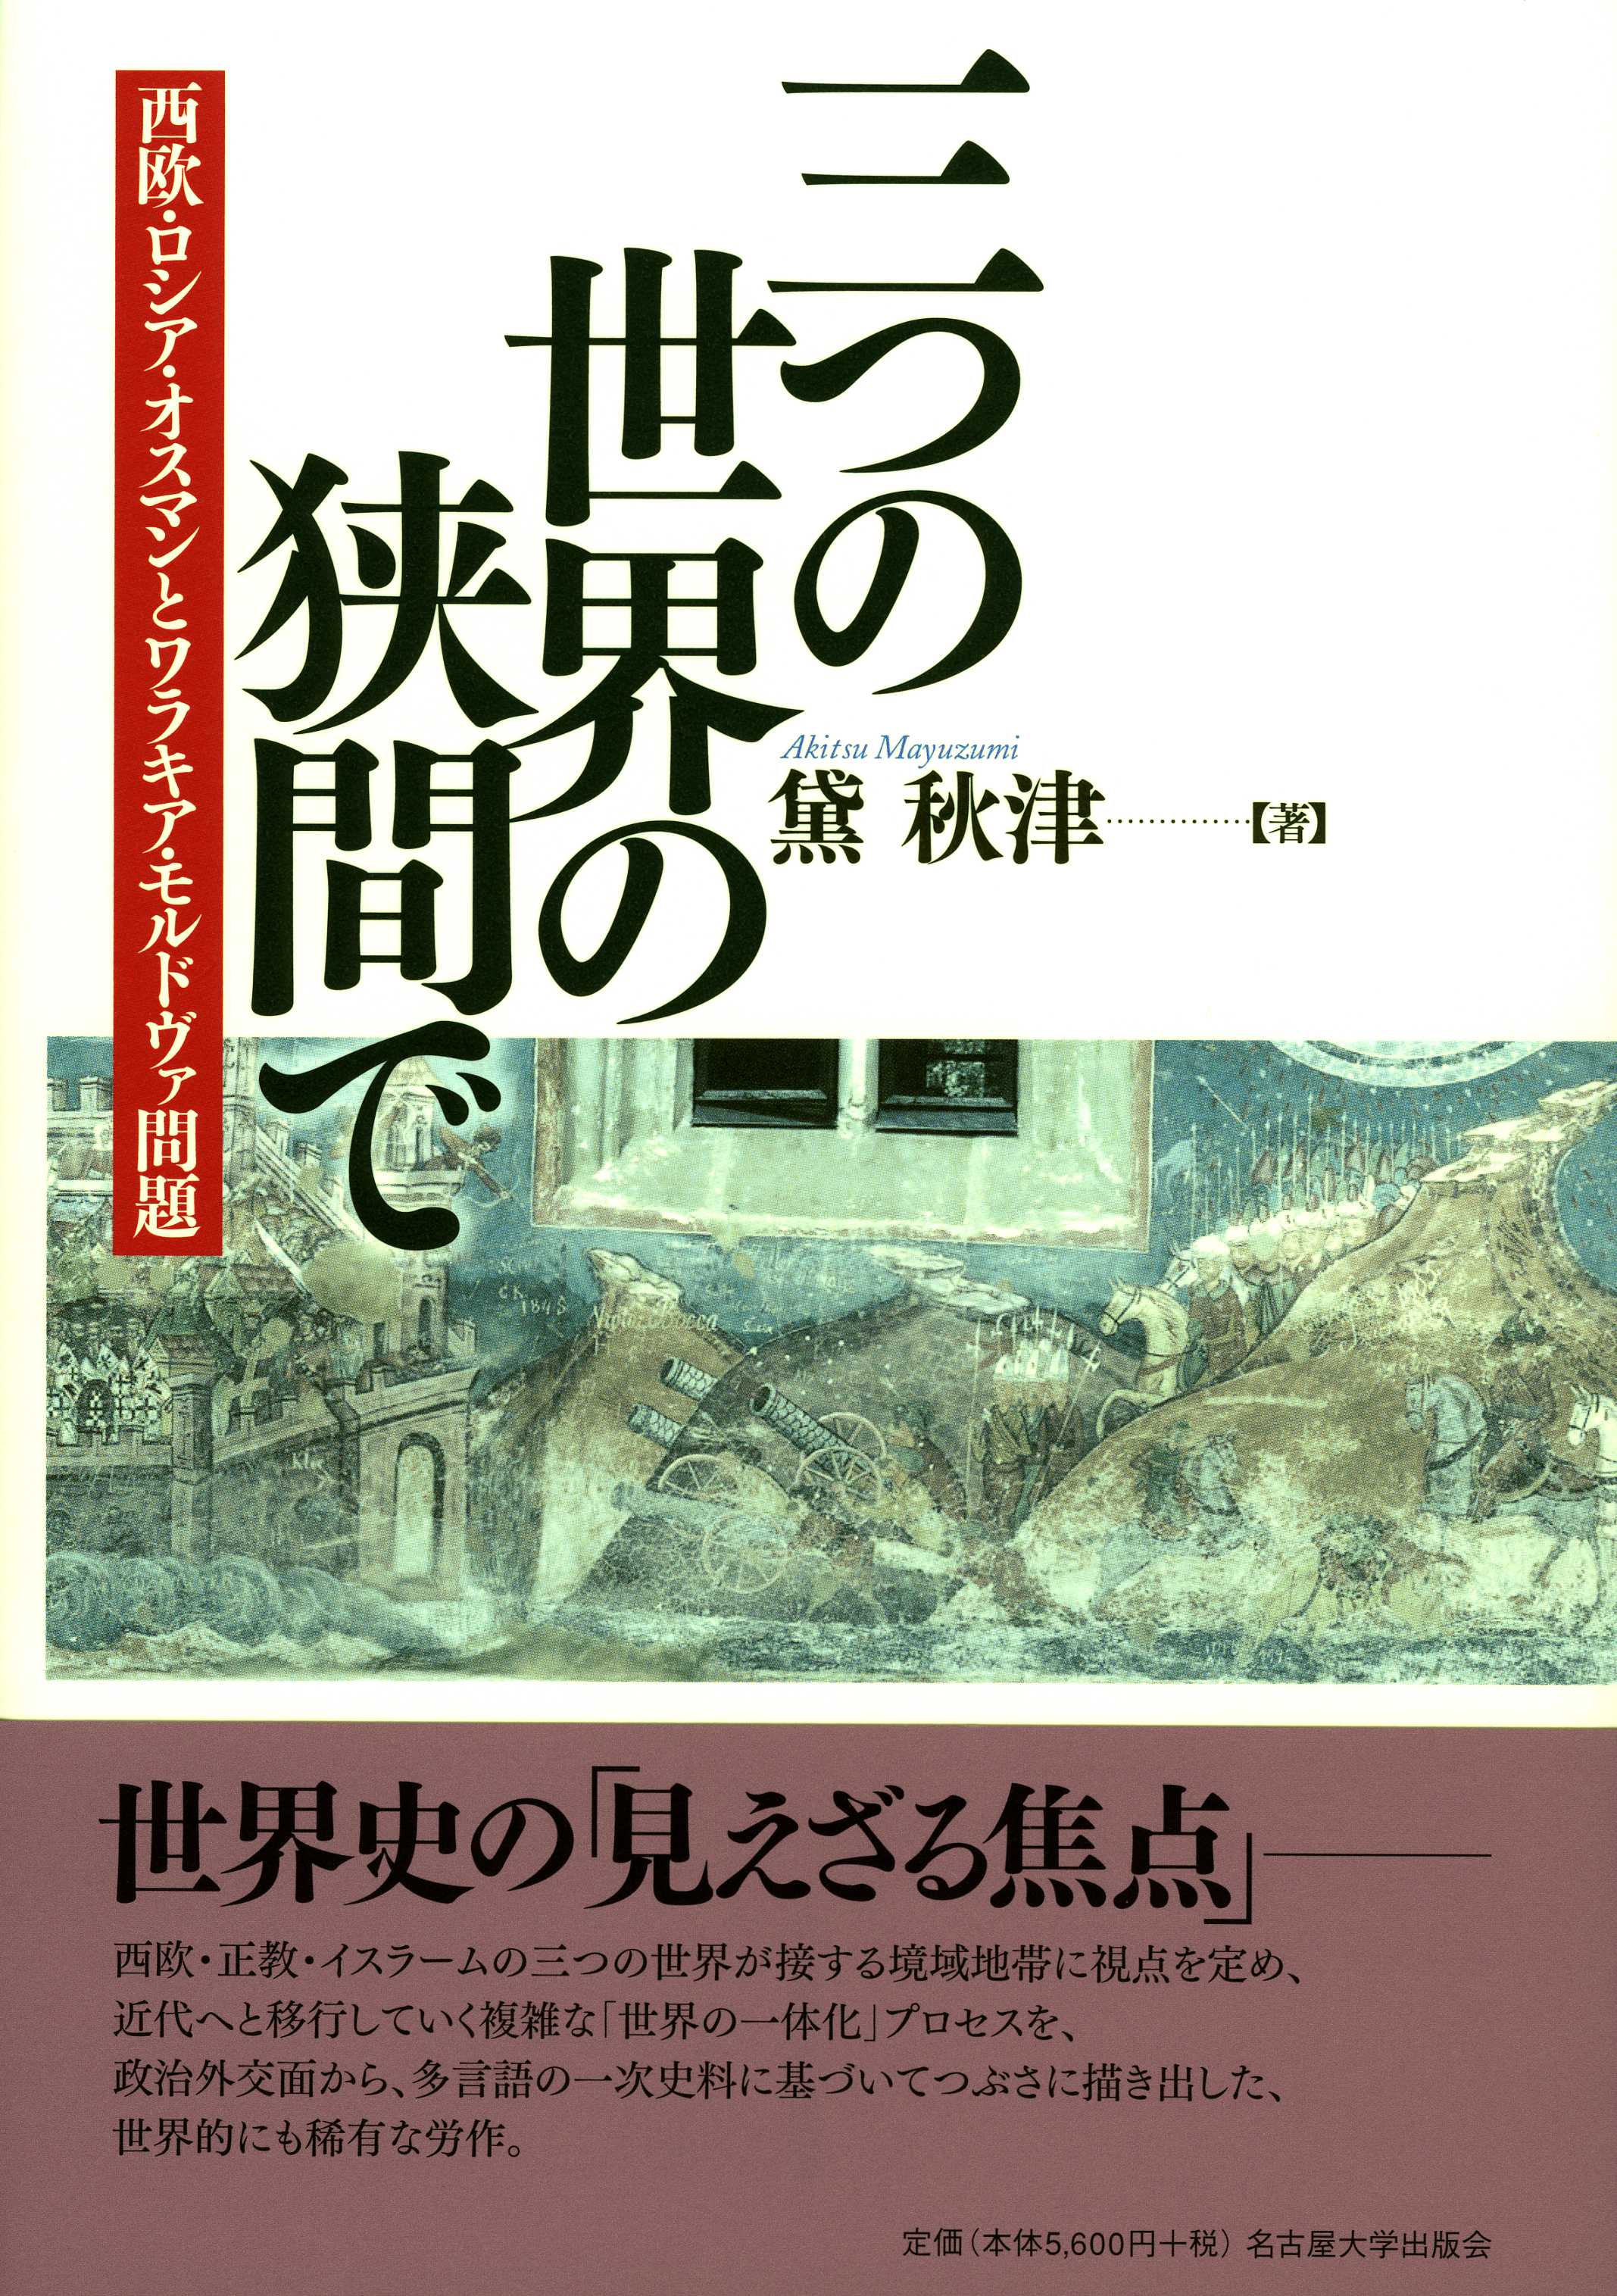 illustration of people mounting on the horses and cannons in the center of the cover